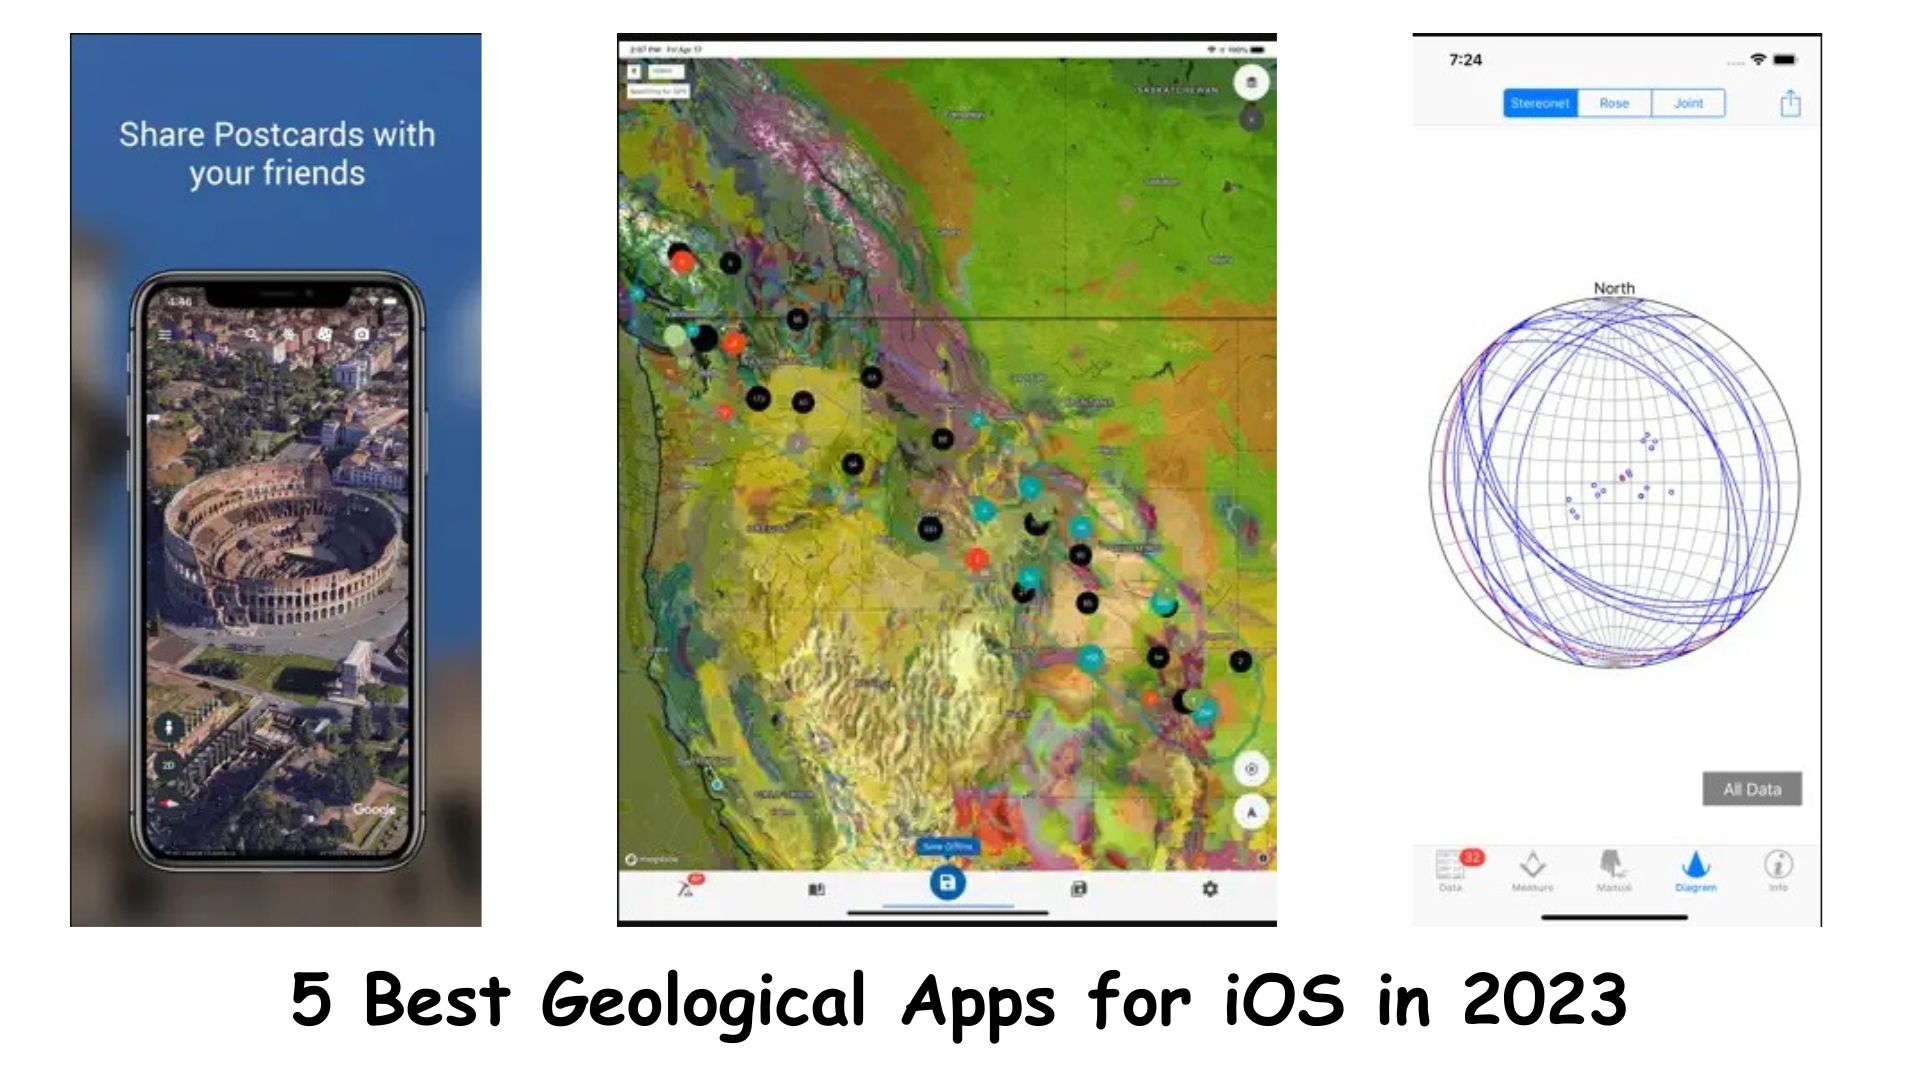 5 Best Geological Apps for iOS in 2023